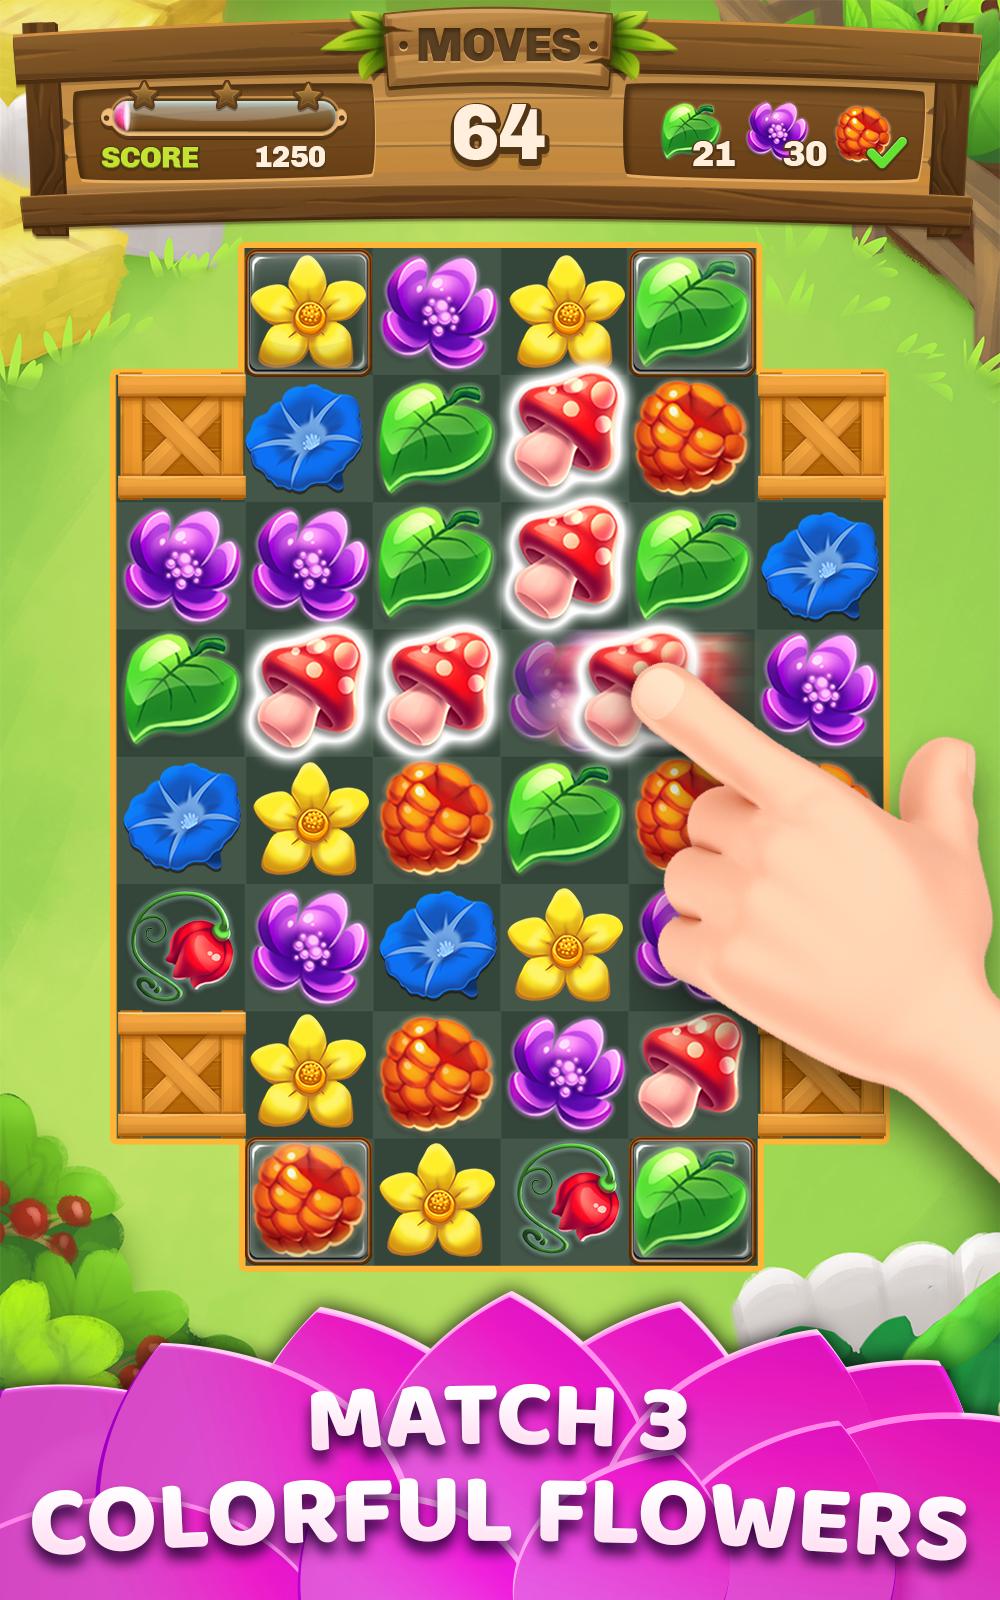 Flower Power Match for Android - APK Download